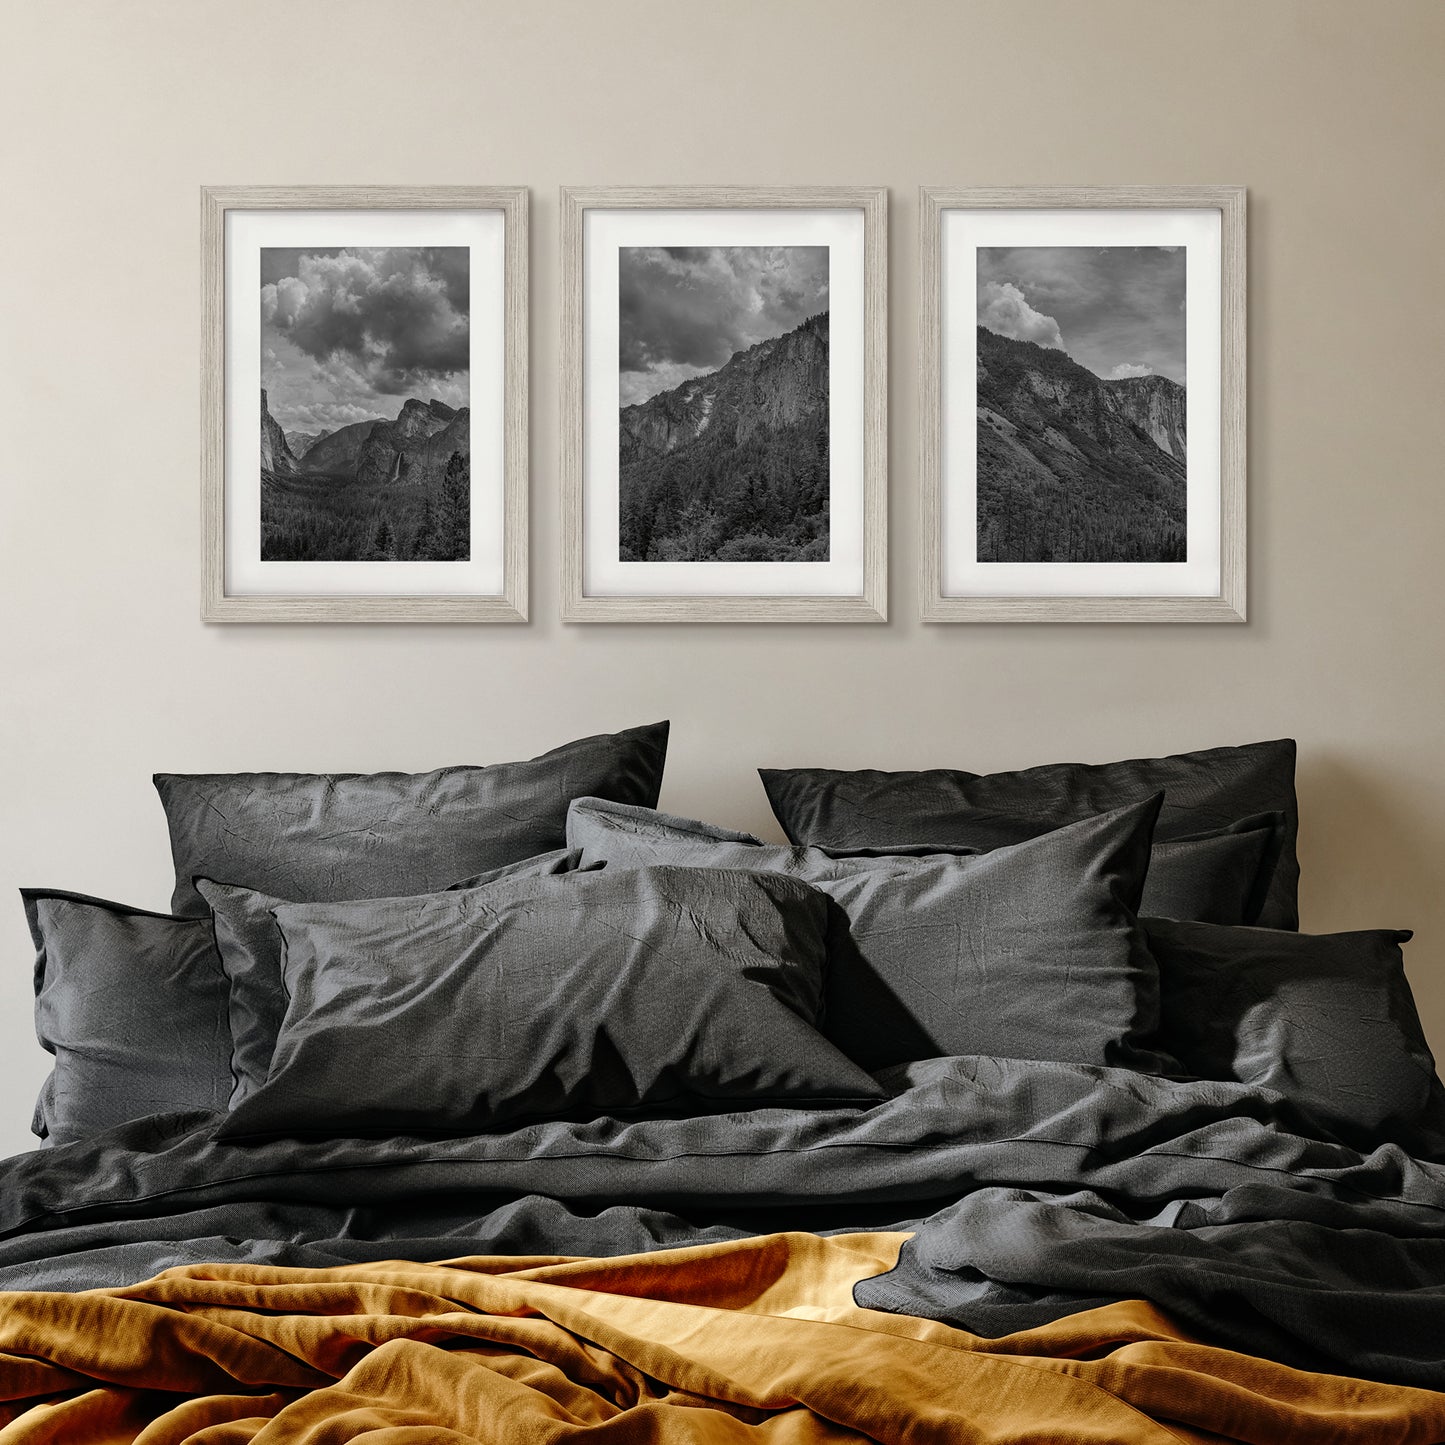 Black Mountain Range by Andre Eichman - 3 Piece Gallery Framed Print with Mat Art Set